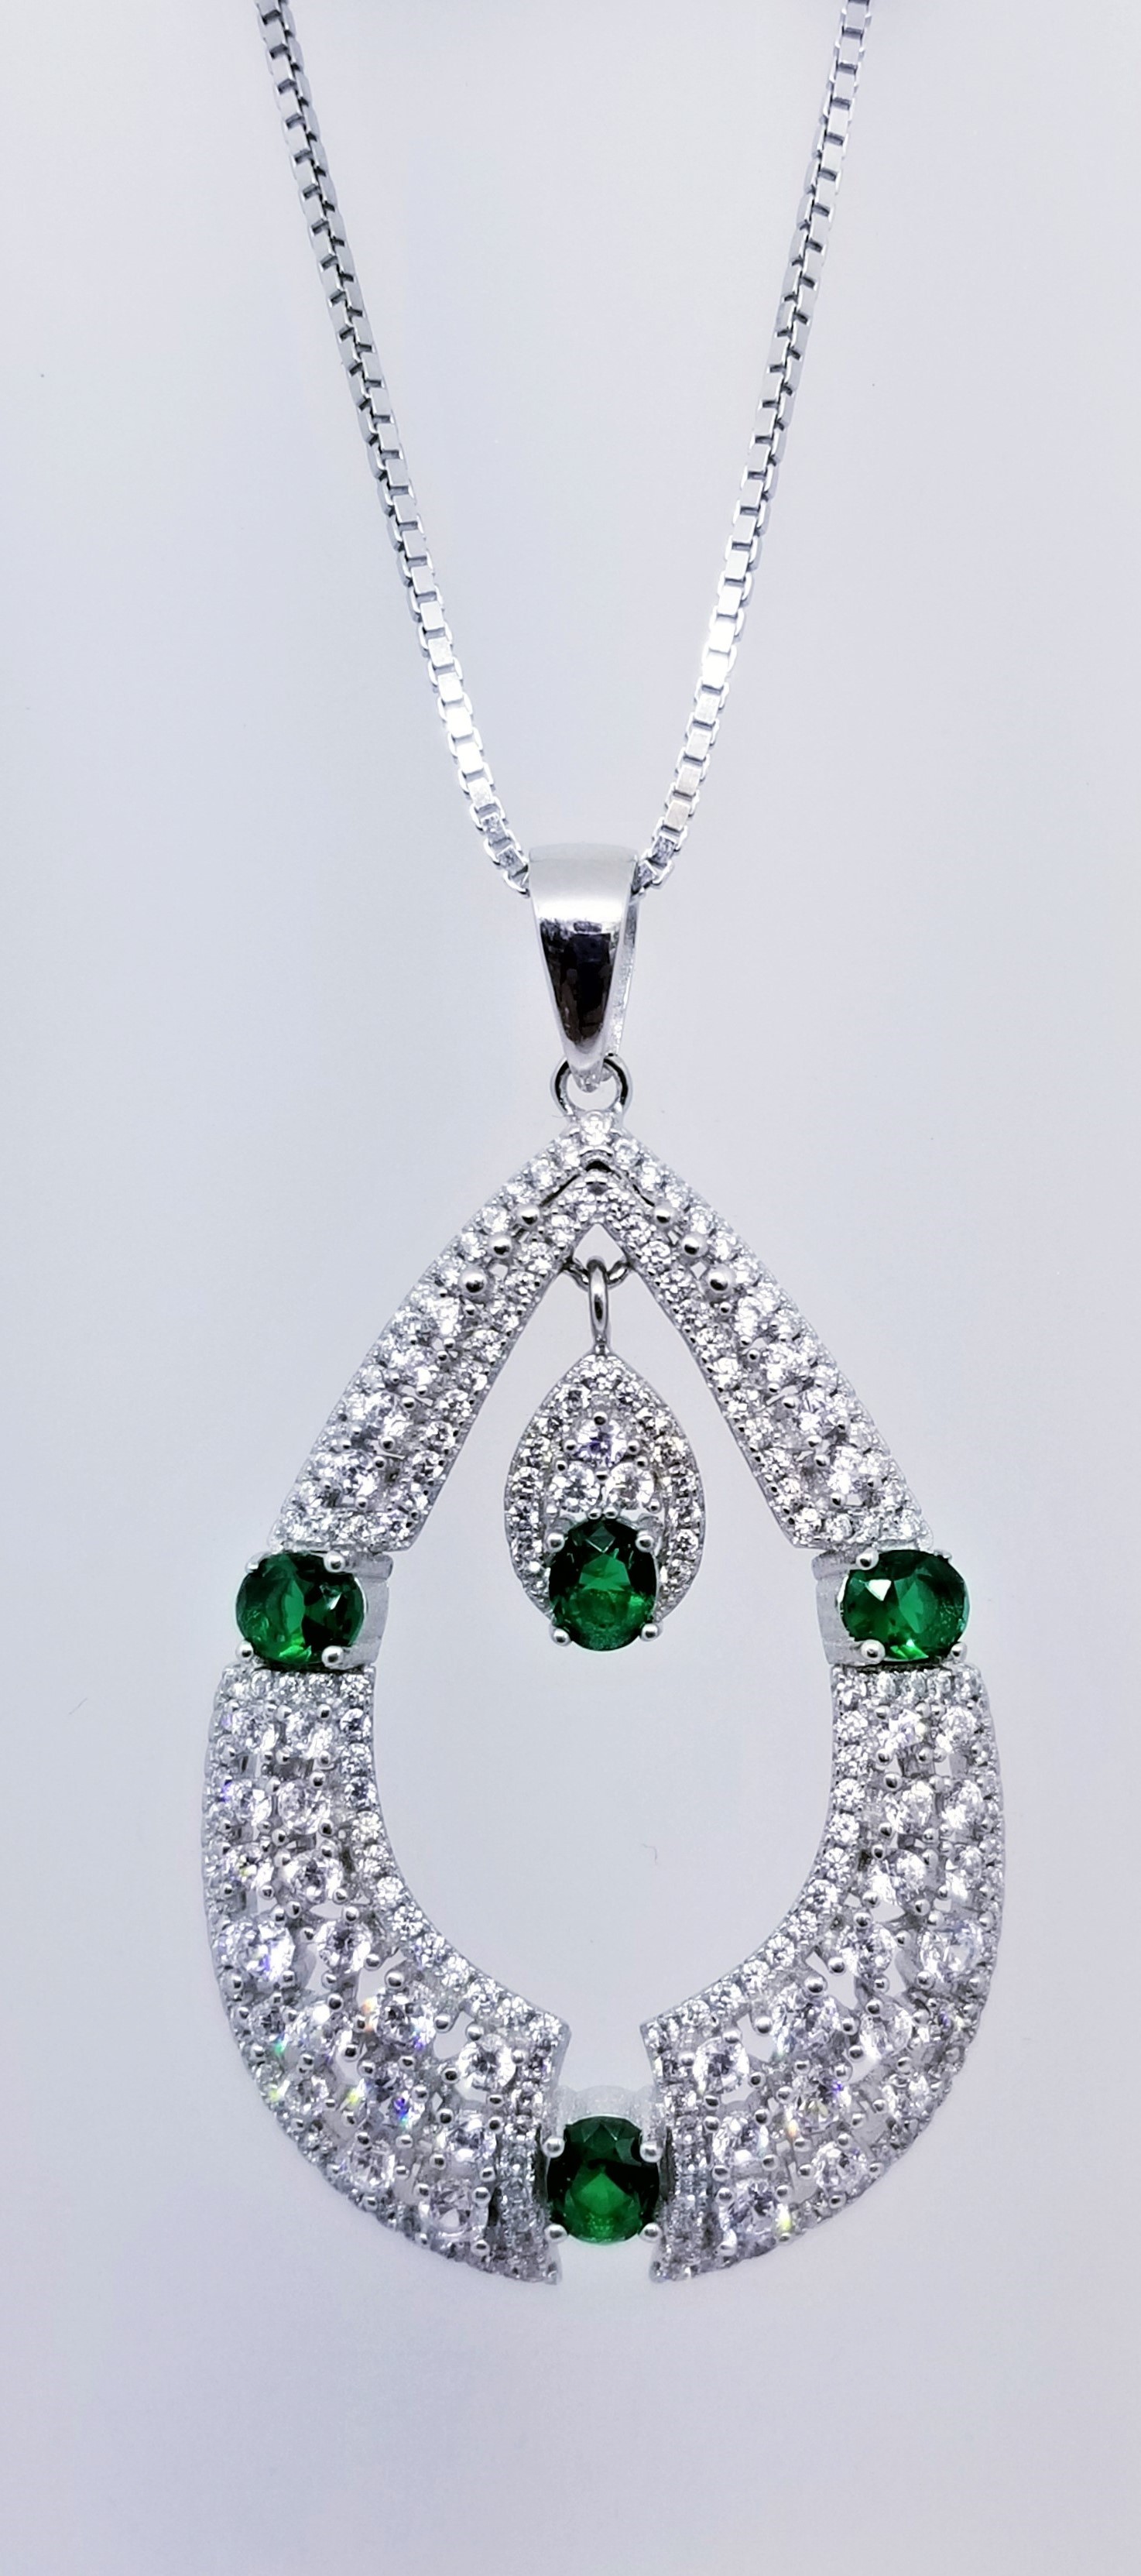 925 Sterling Silver Rhodium Tone Pendant With Emerald And CZ Stones